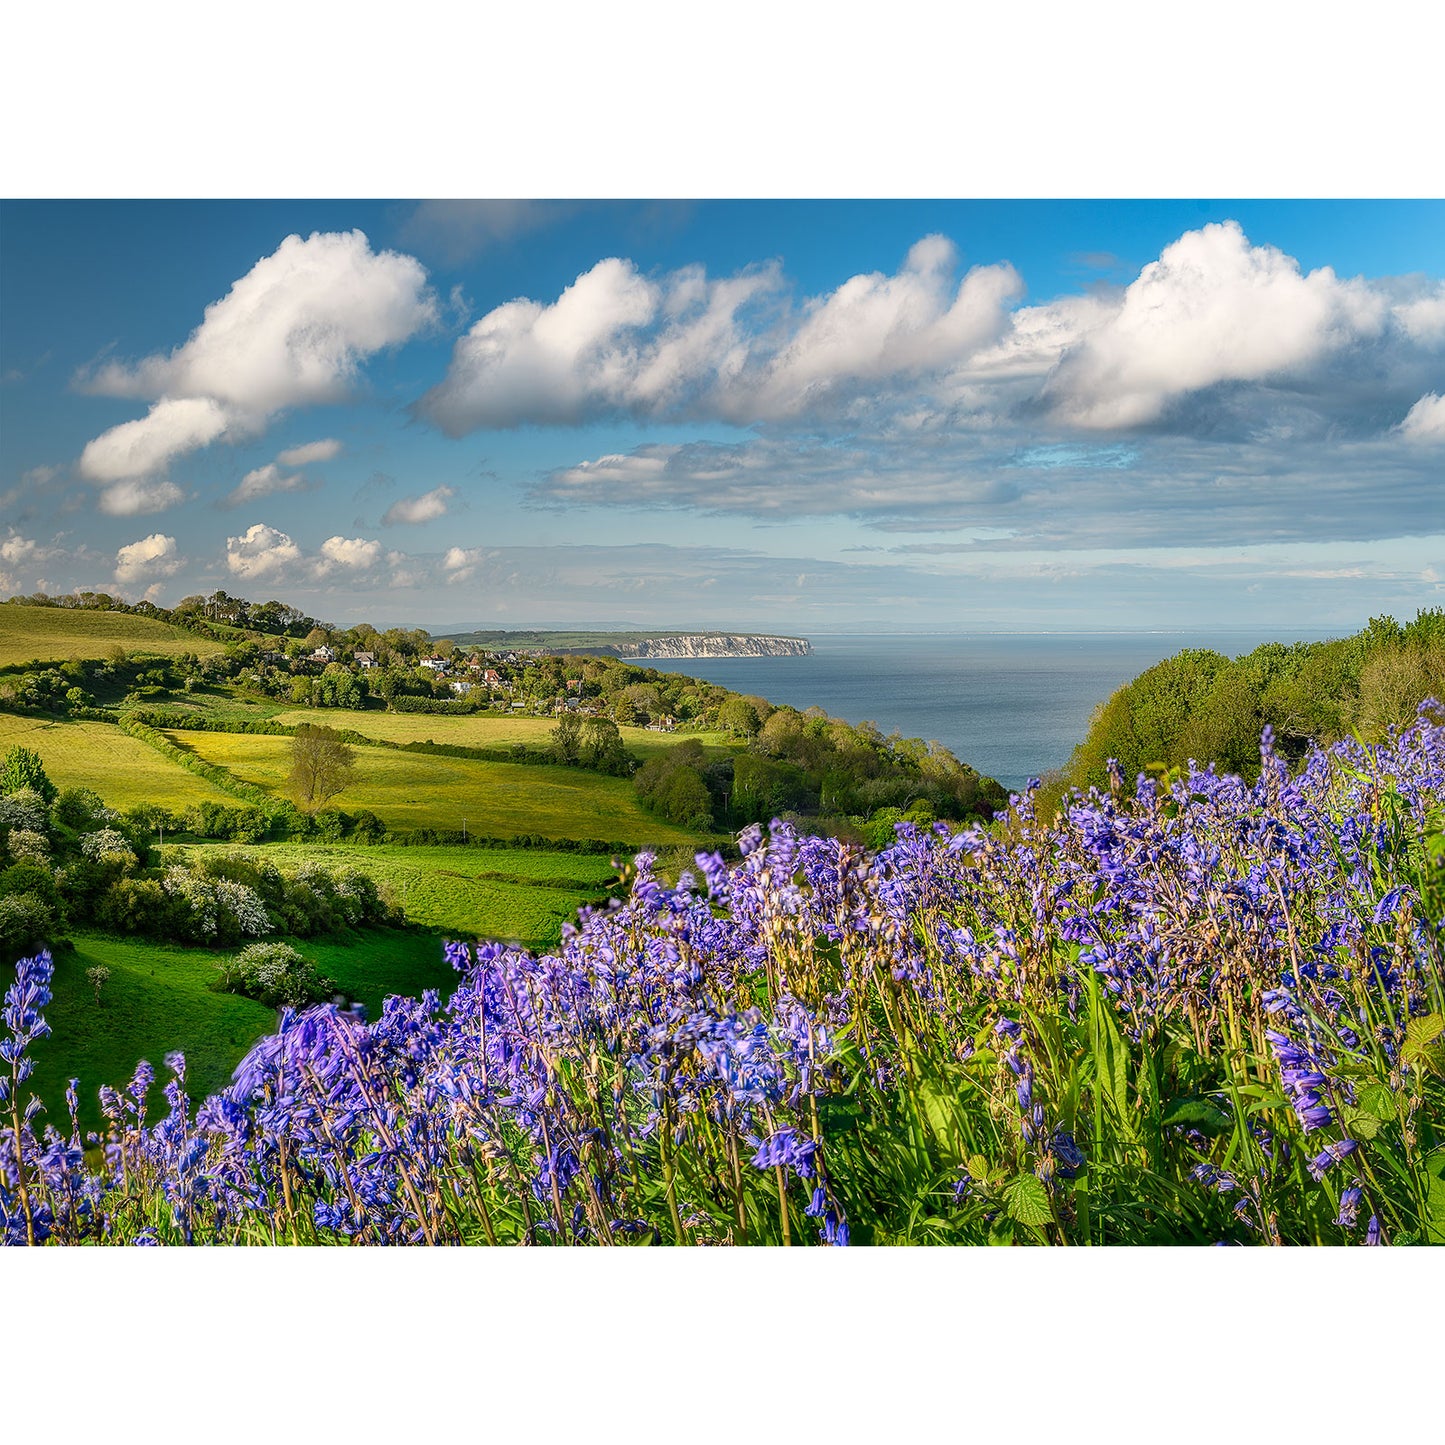 Bluebells at Luccombe